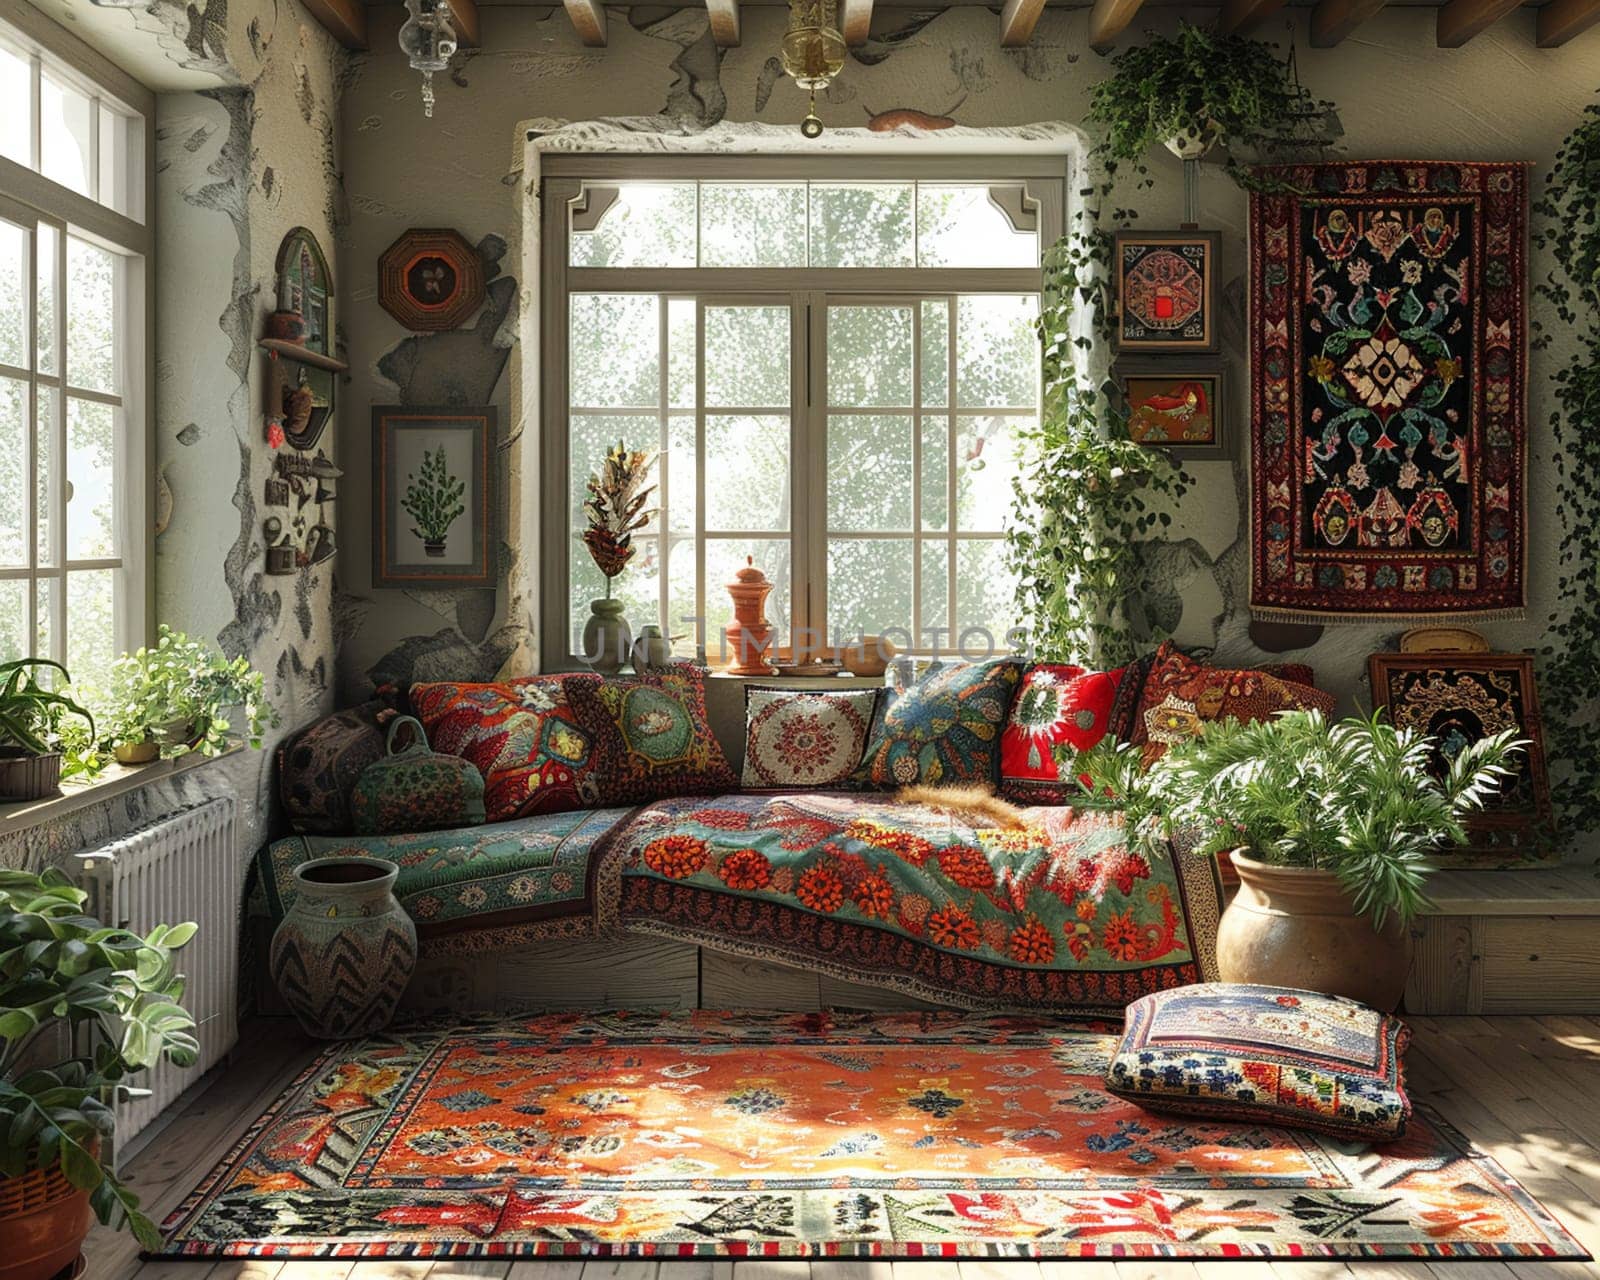 Traditional Russian dacha with folk art and a samovar3D render